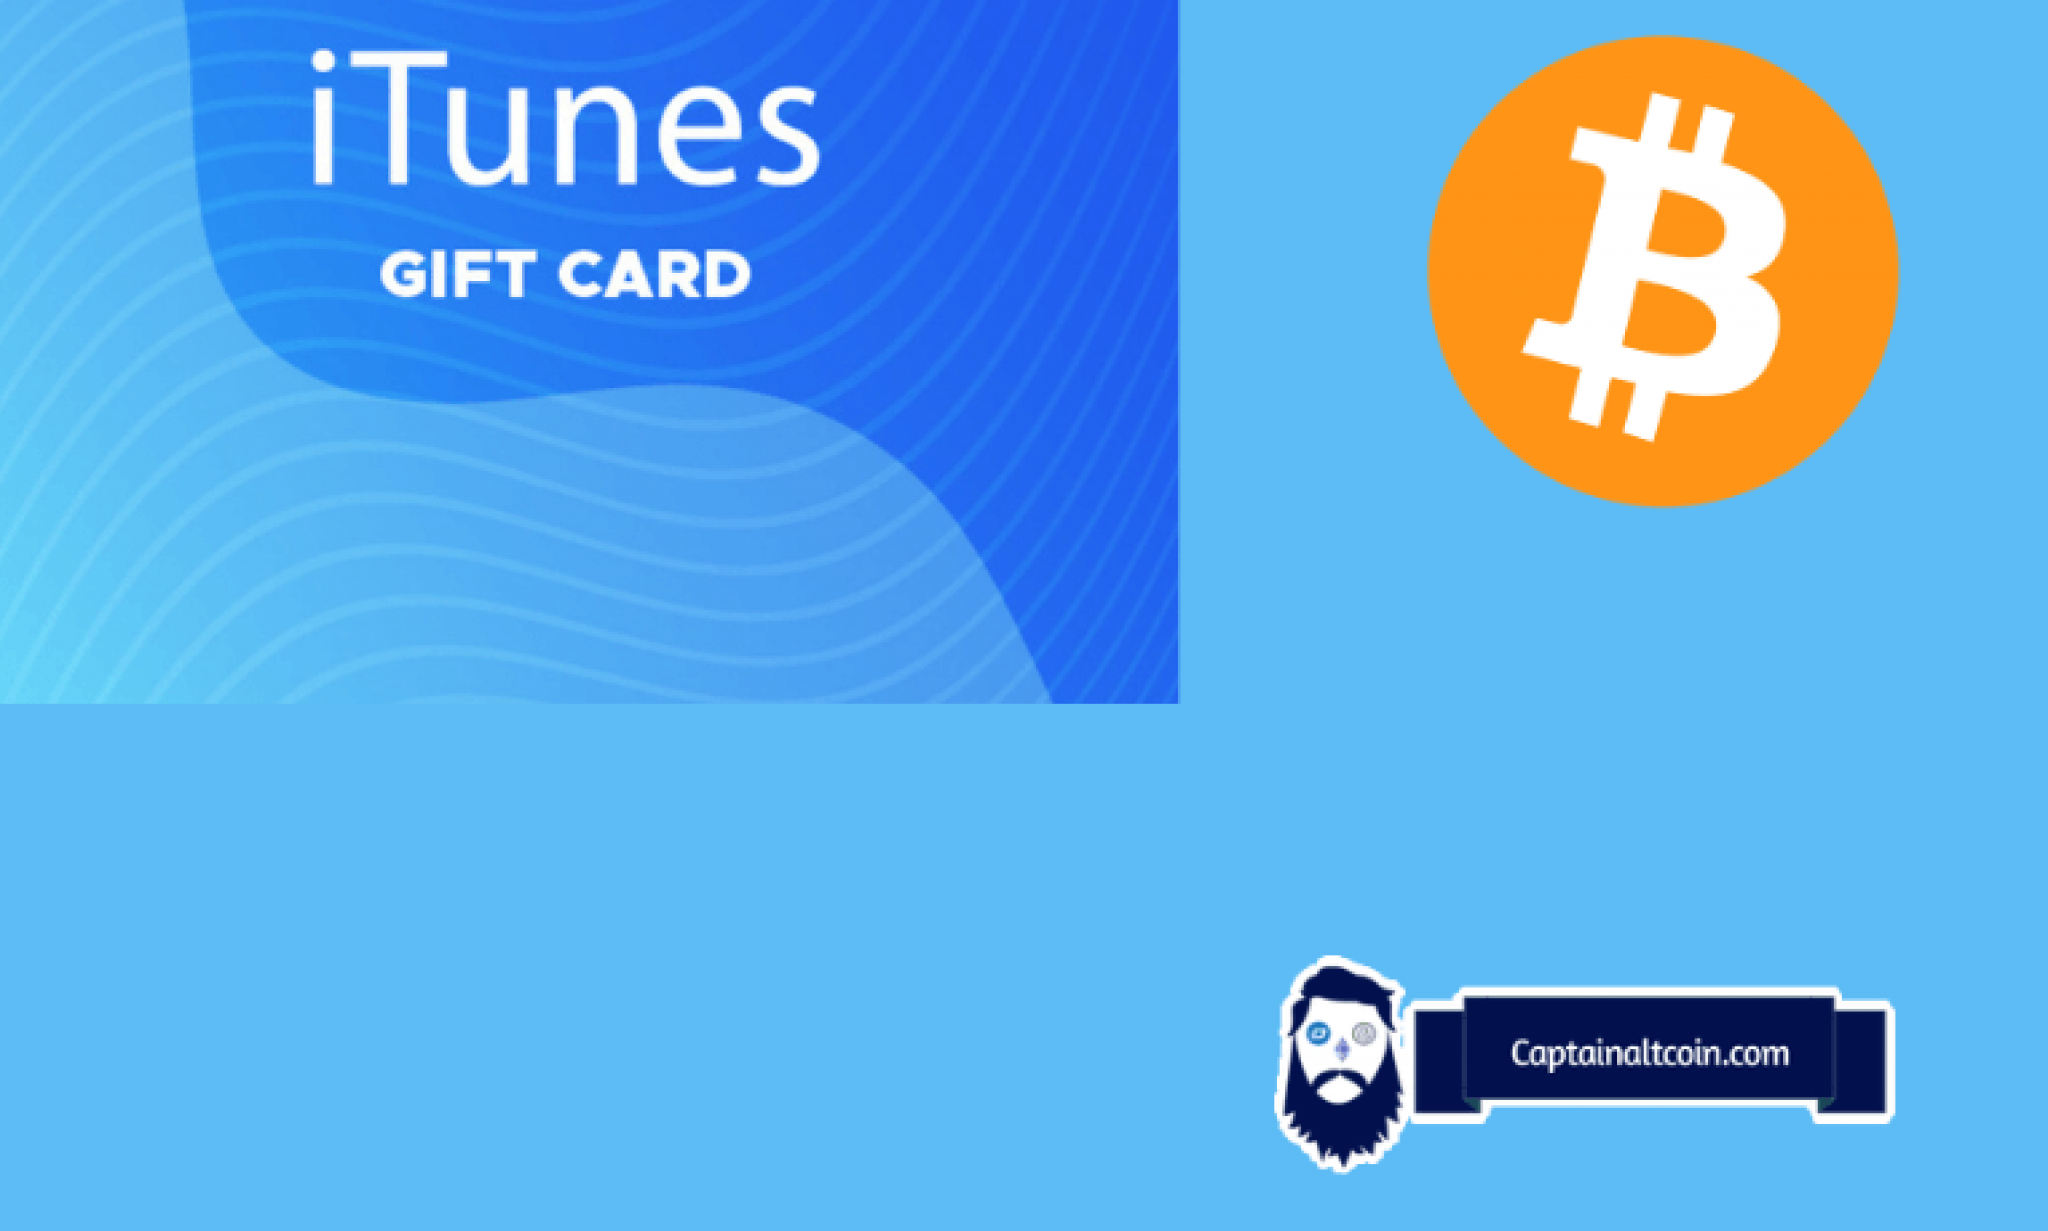 can you use itunes gift card to buy bitcoin